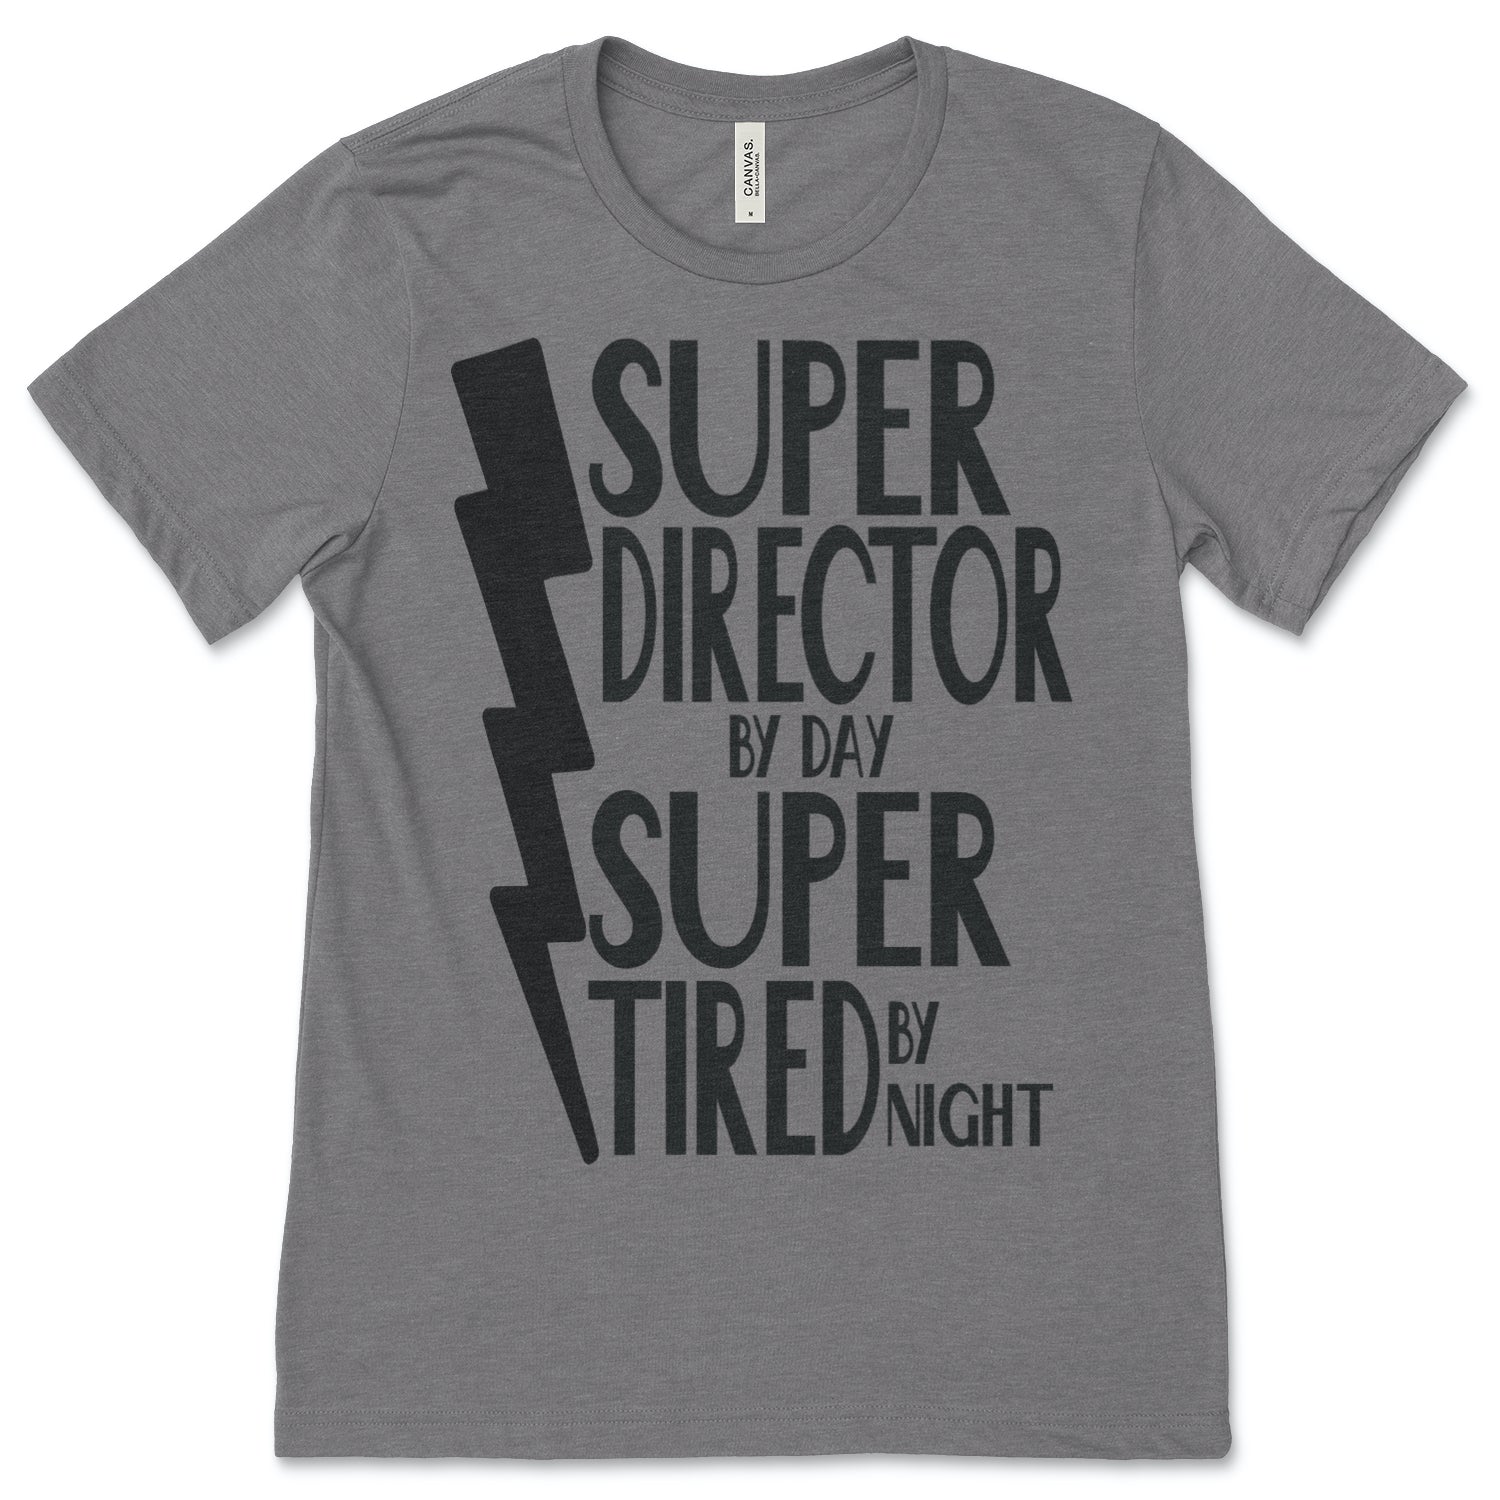 SUPER DIRECTOR BY DAY SUPER TIRED BY NIGHT T-SHIRT - CREW NECK